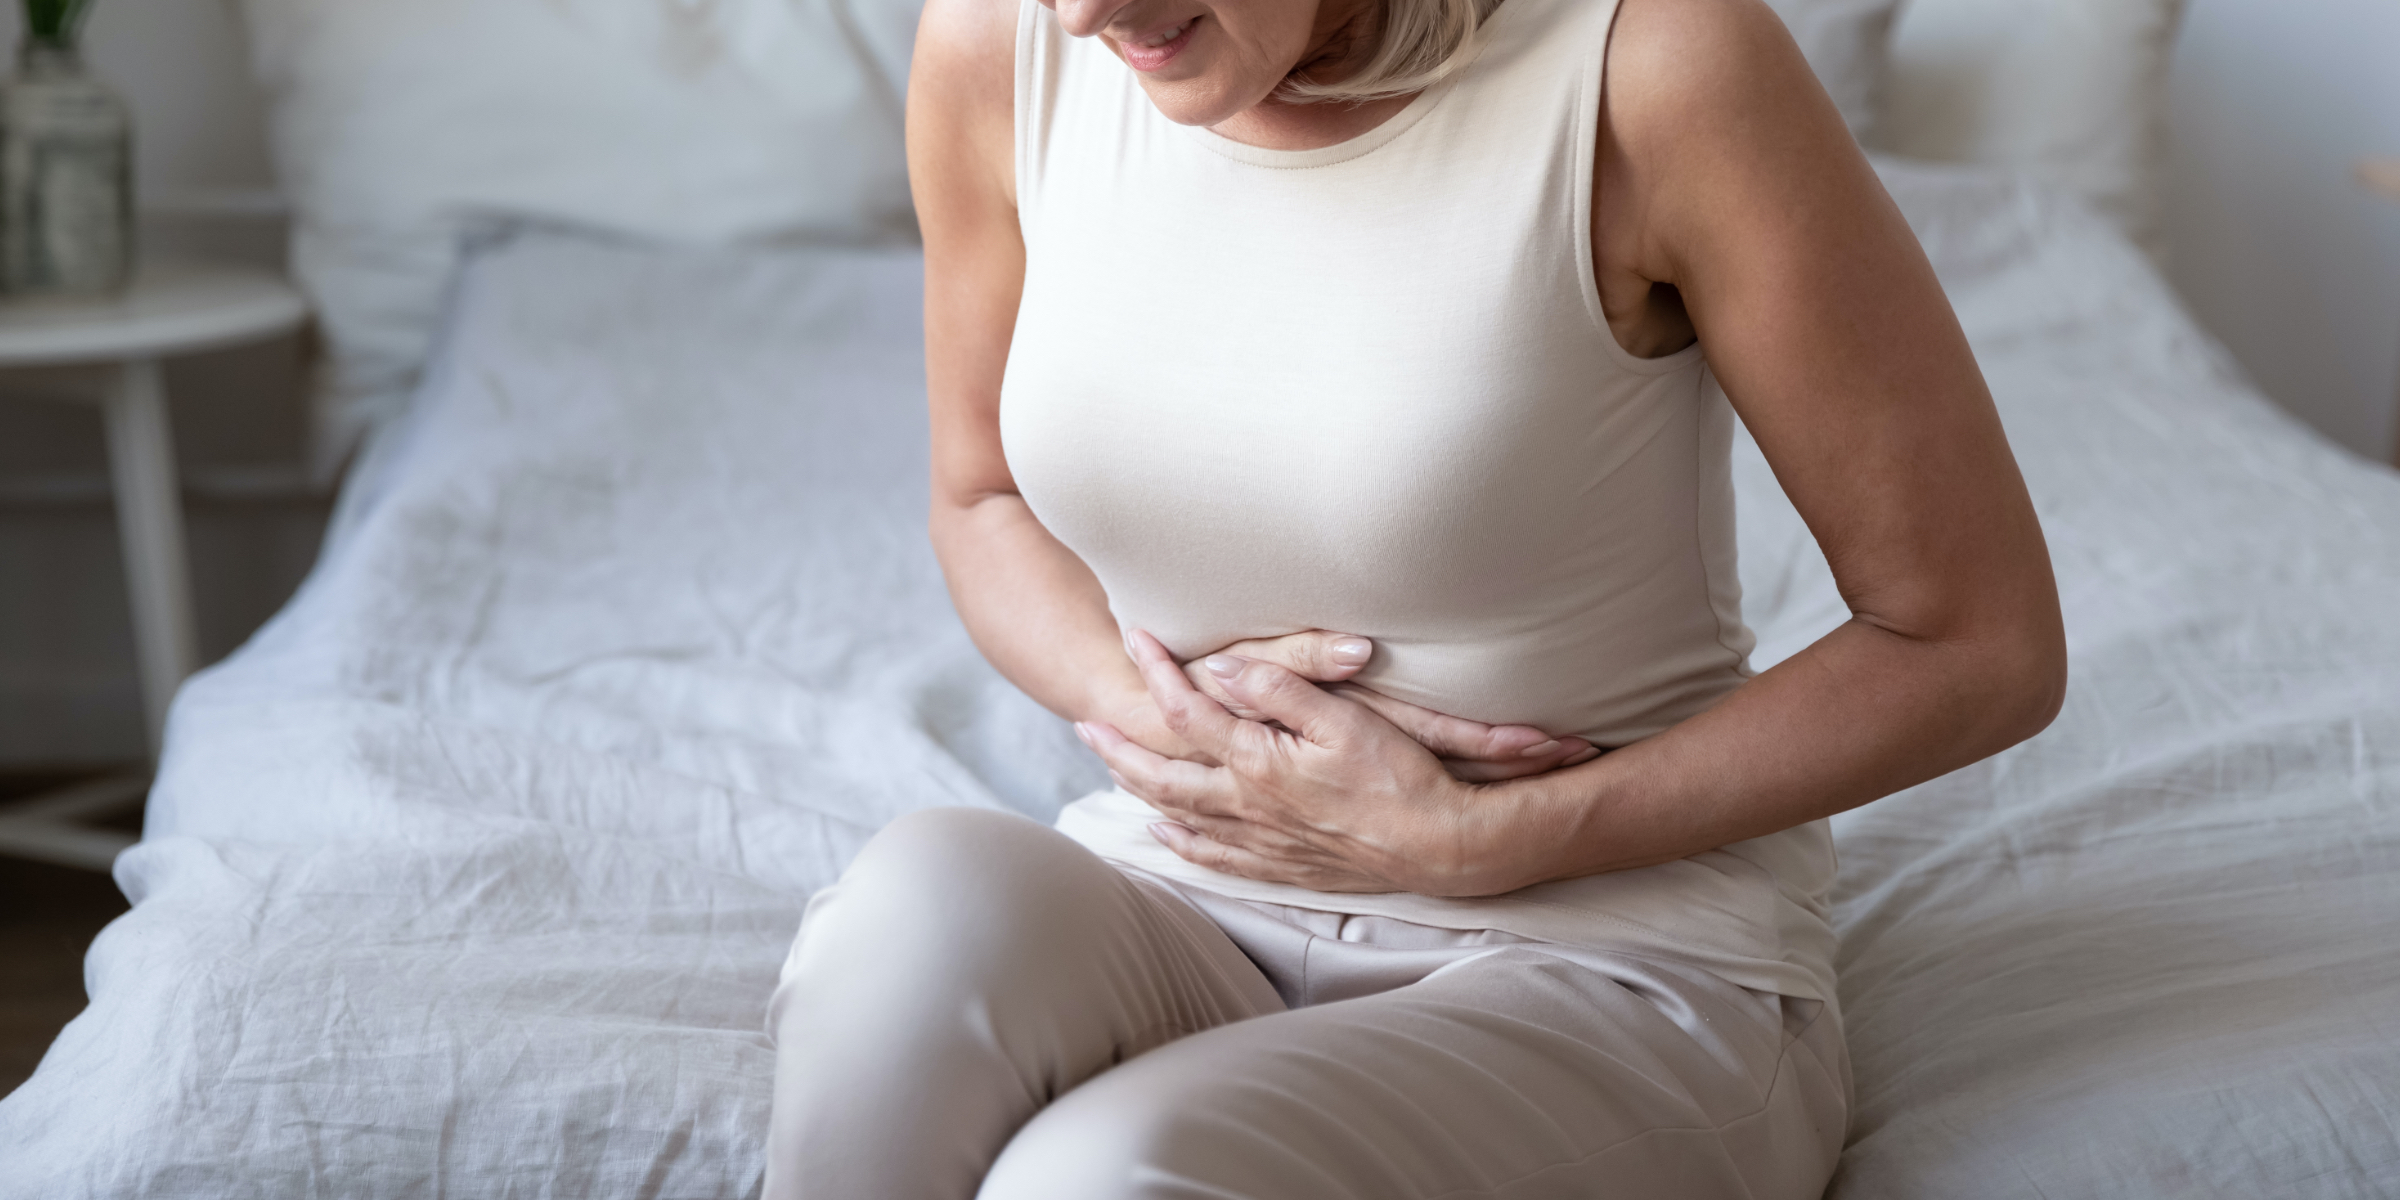 Woman with a digestive disorder clutching her stomach